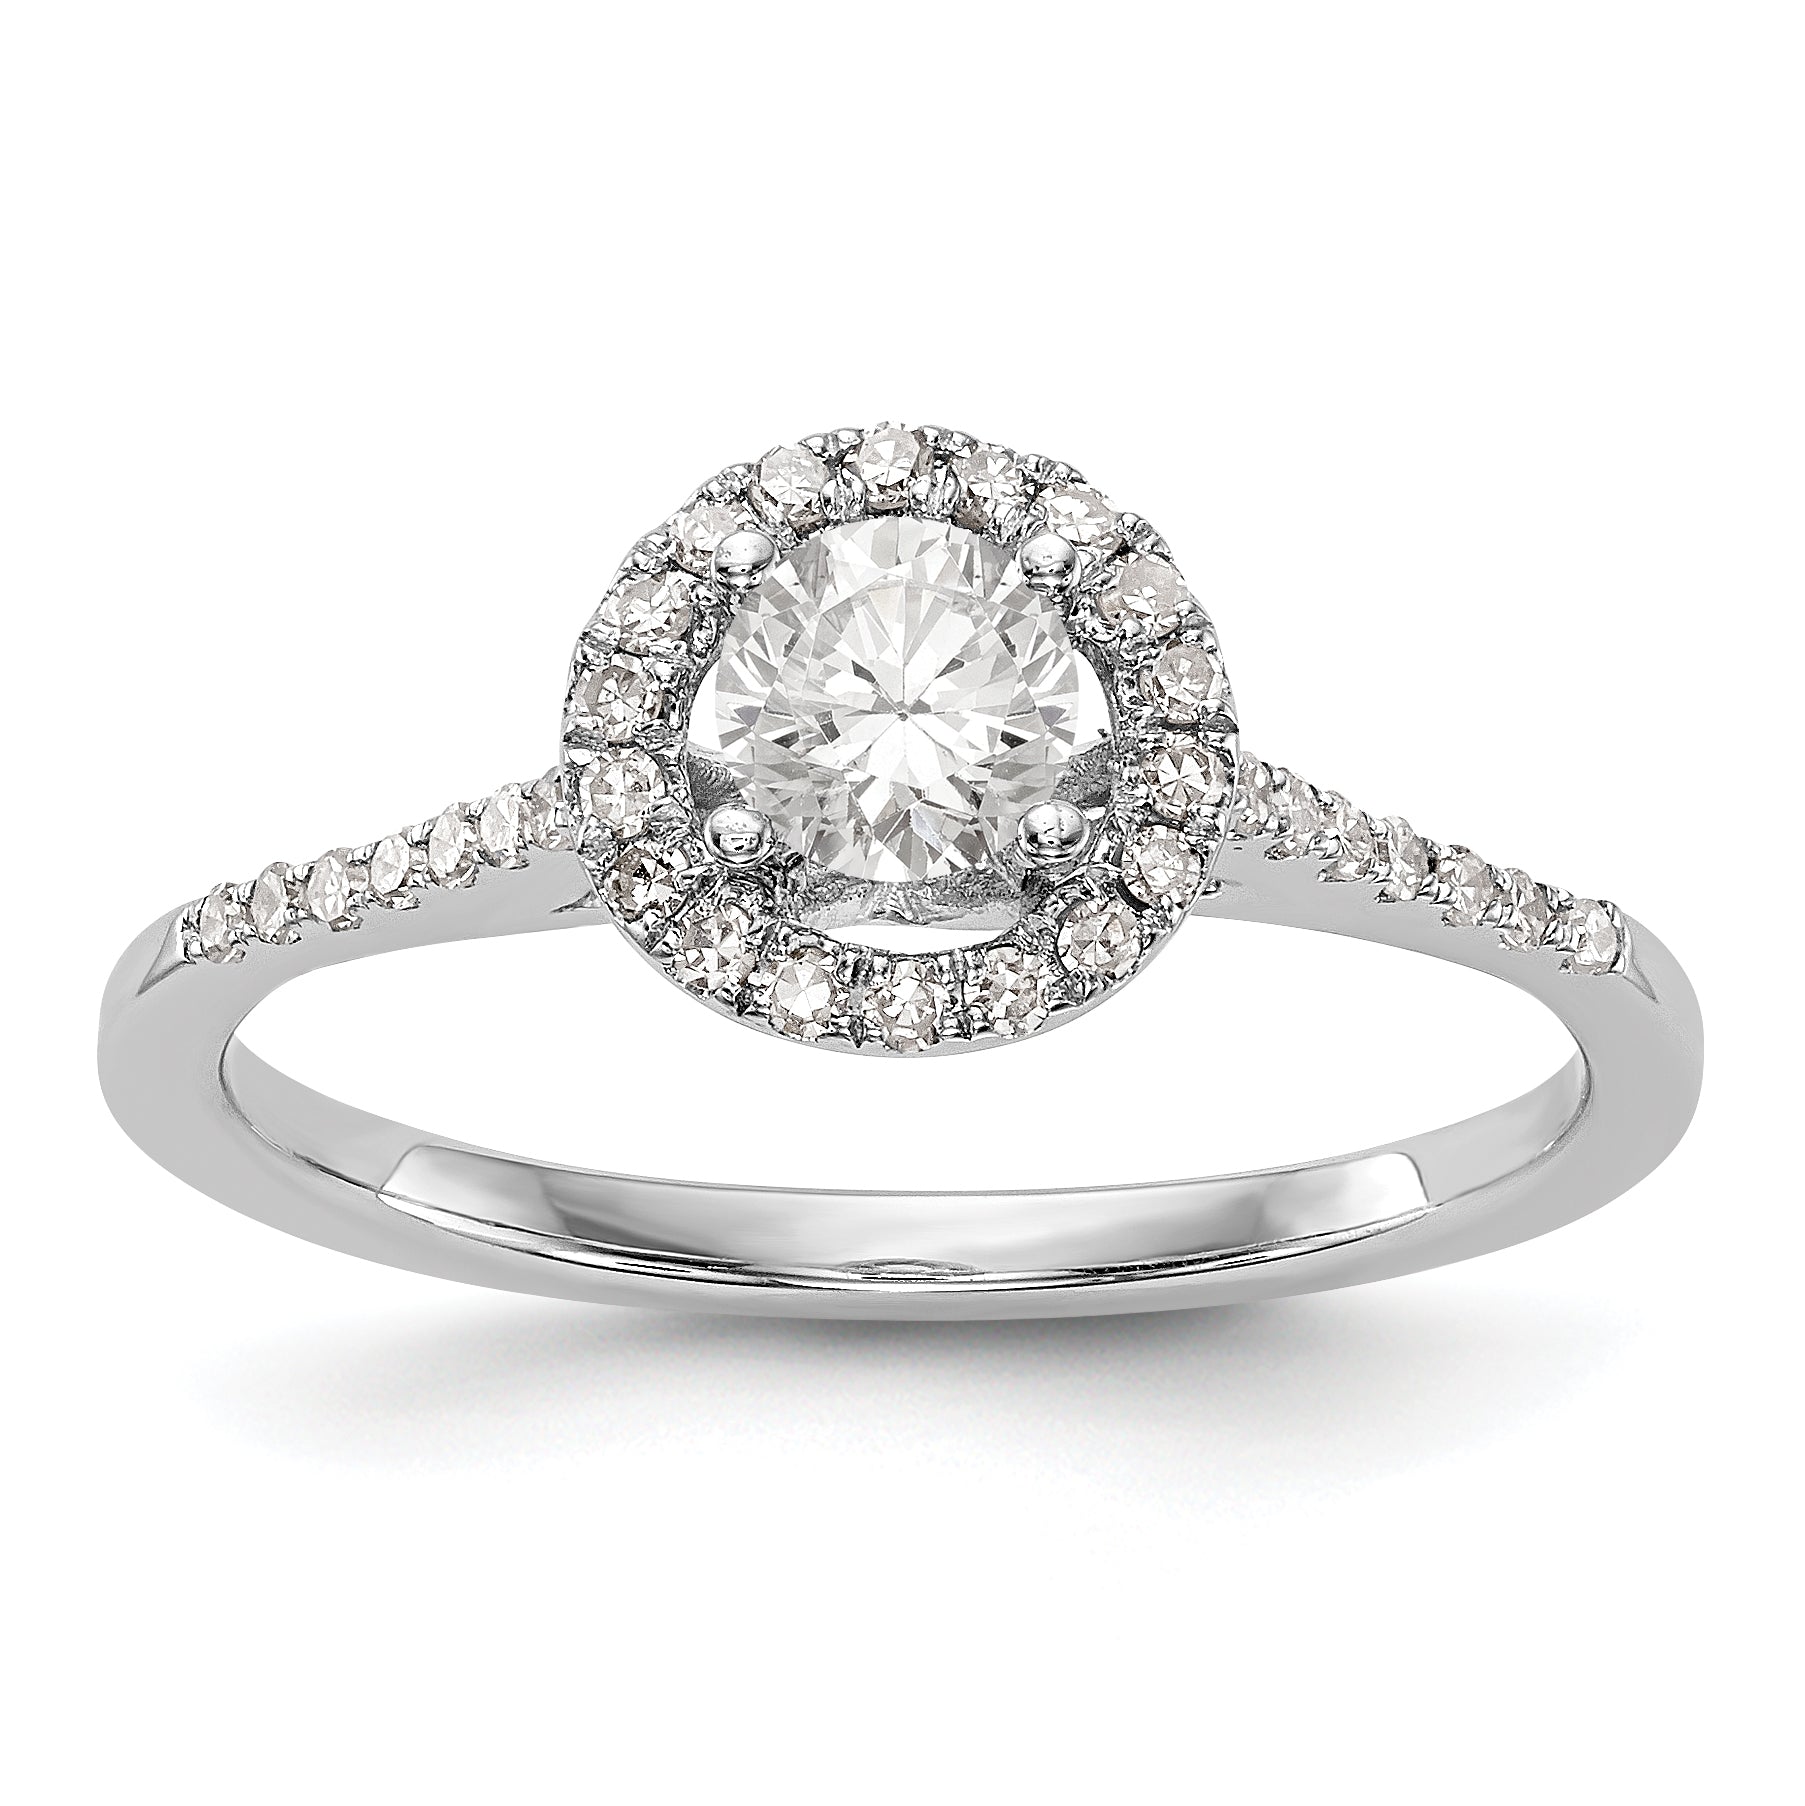 Image of ID 1 3/4 Ct TW Natural Diamond Halo Engagement Ring in 14K White Gold